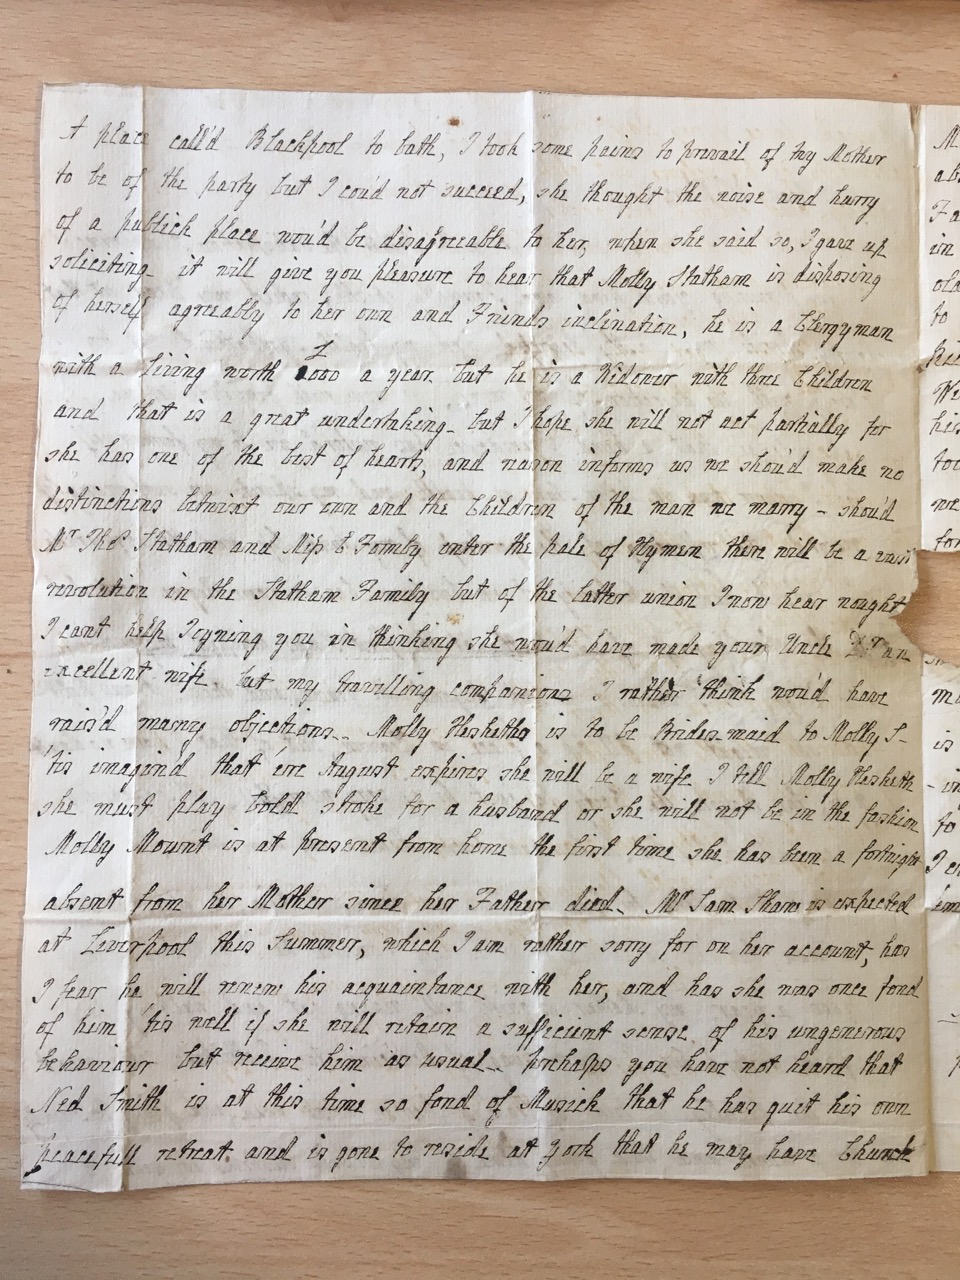 Image #2 of letter: J[enny[ Brownsword to Ann Hare, 7 June 1773